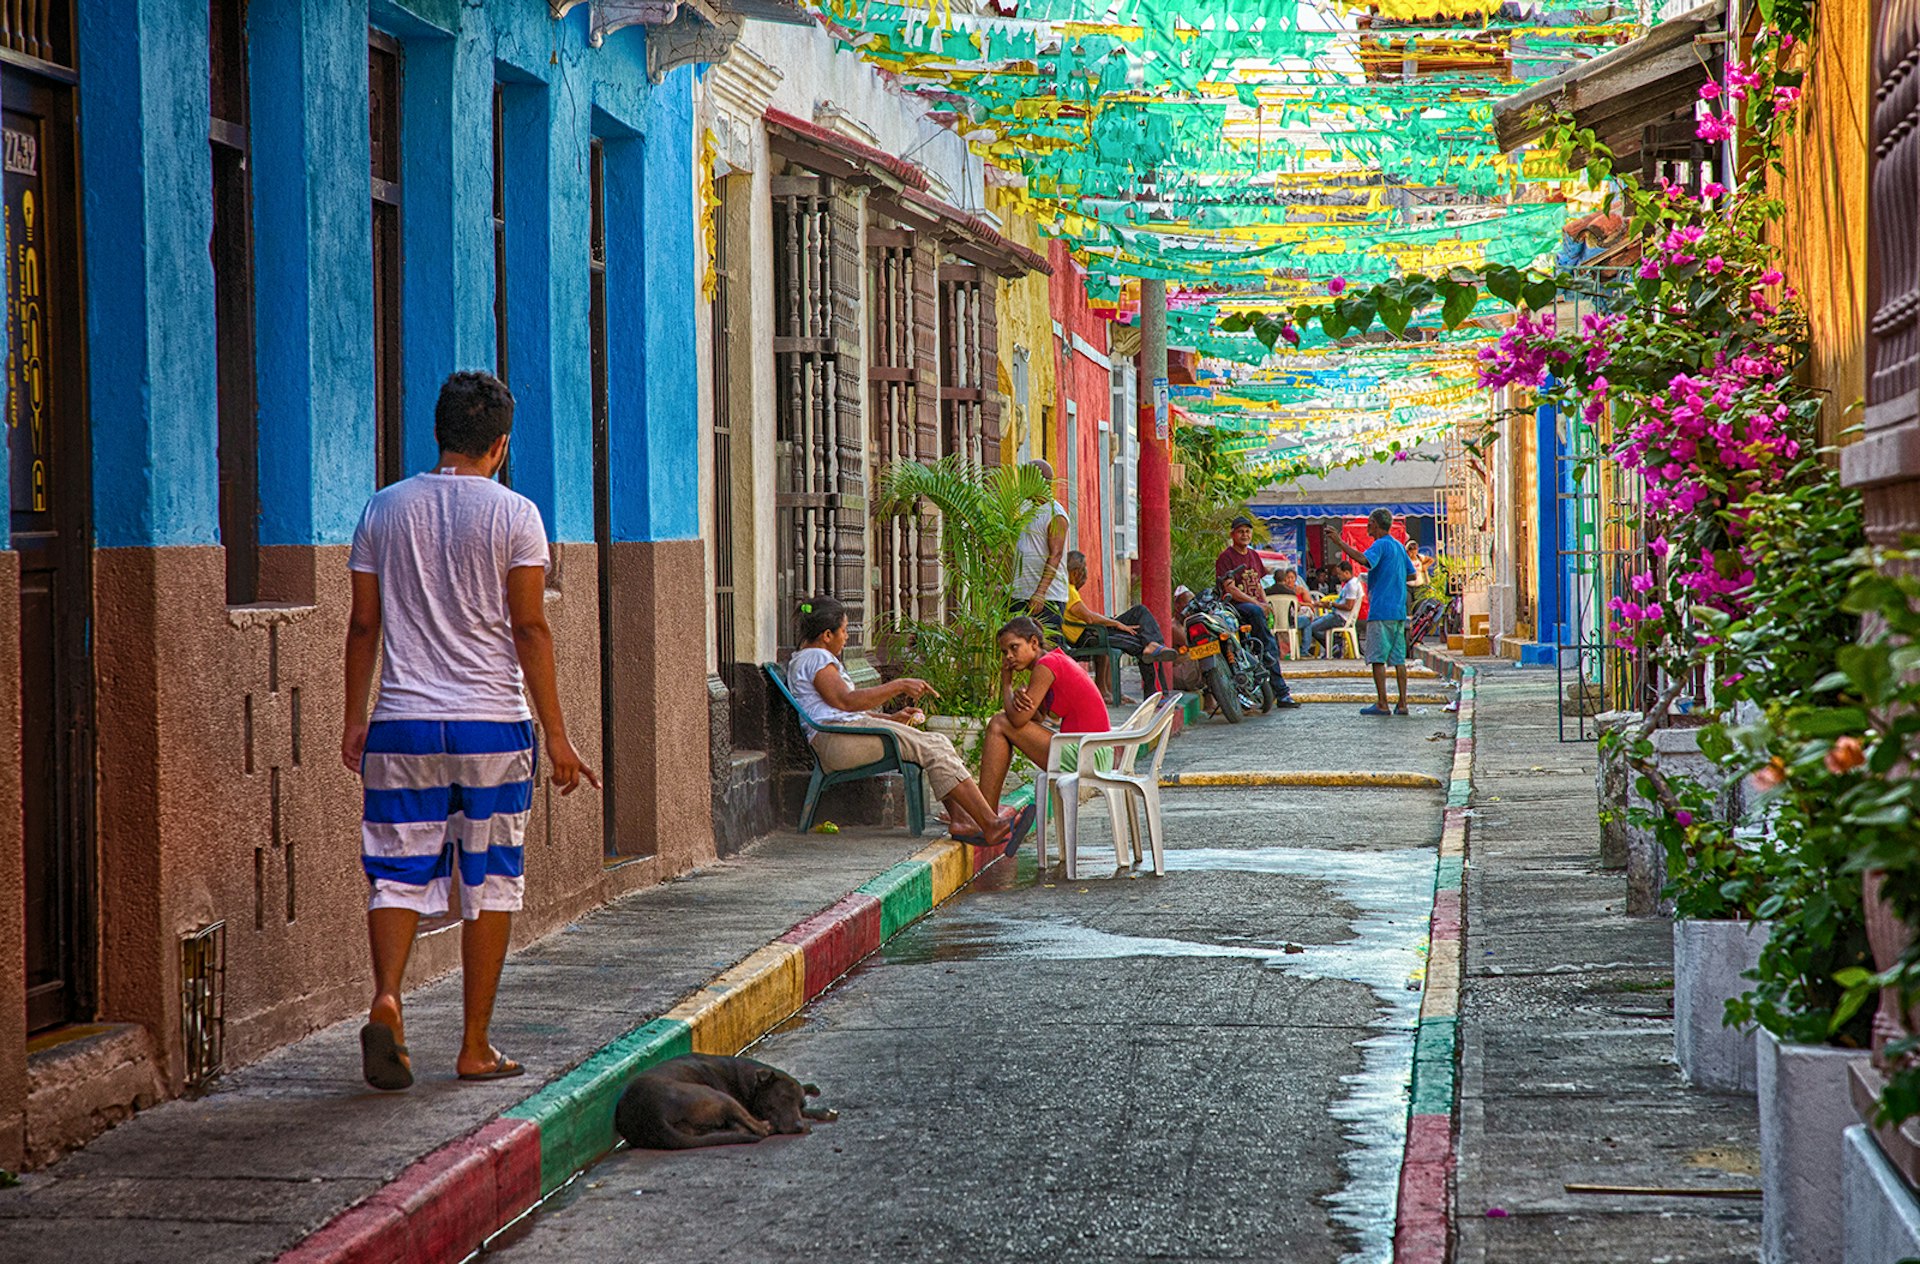 A man in white and blue striped shorts walks down a colorful street with a green and yellow paper canopy © Garytog / Getty Images